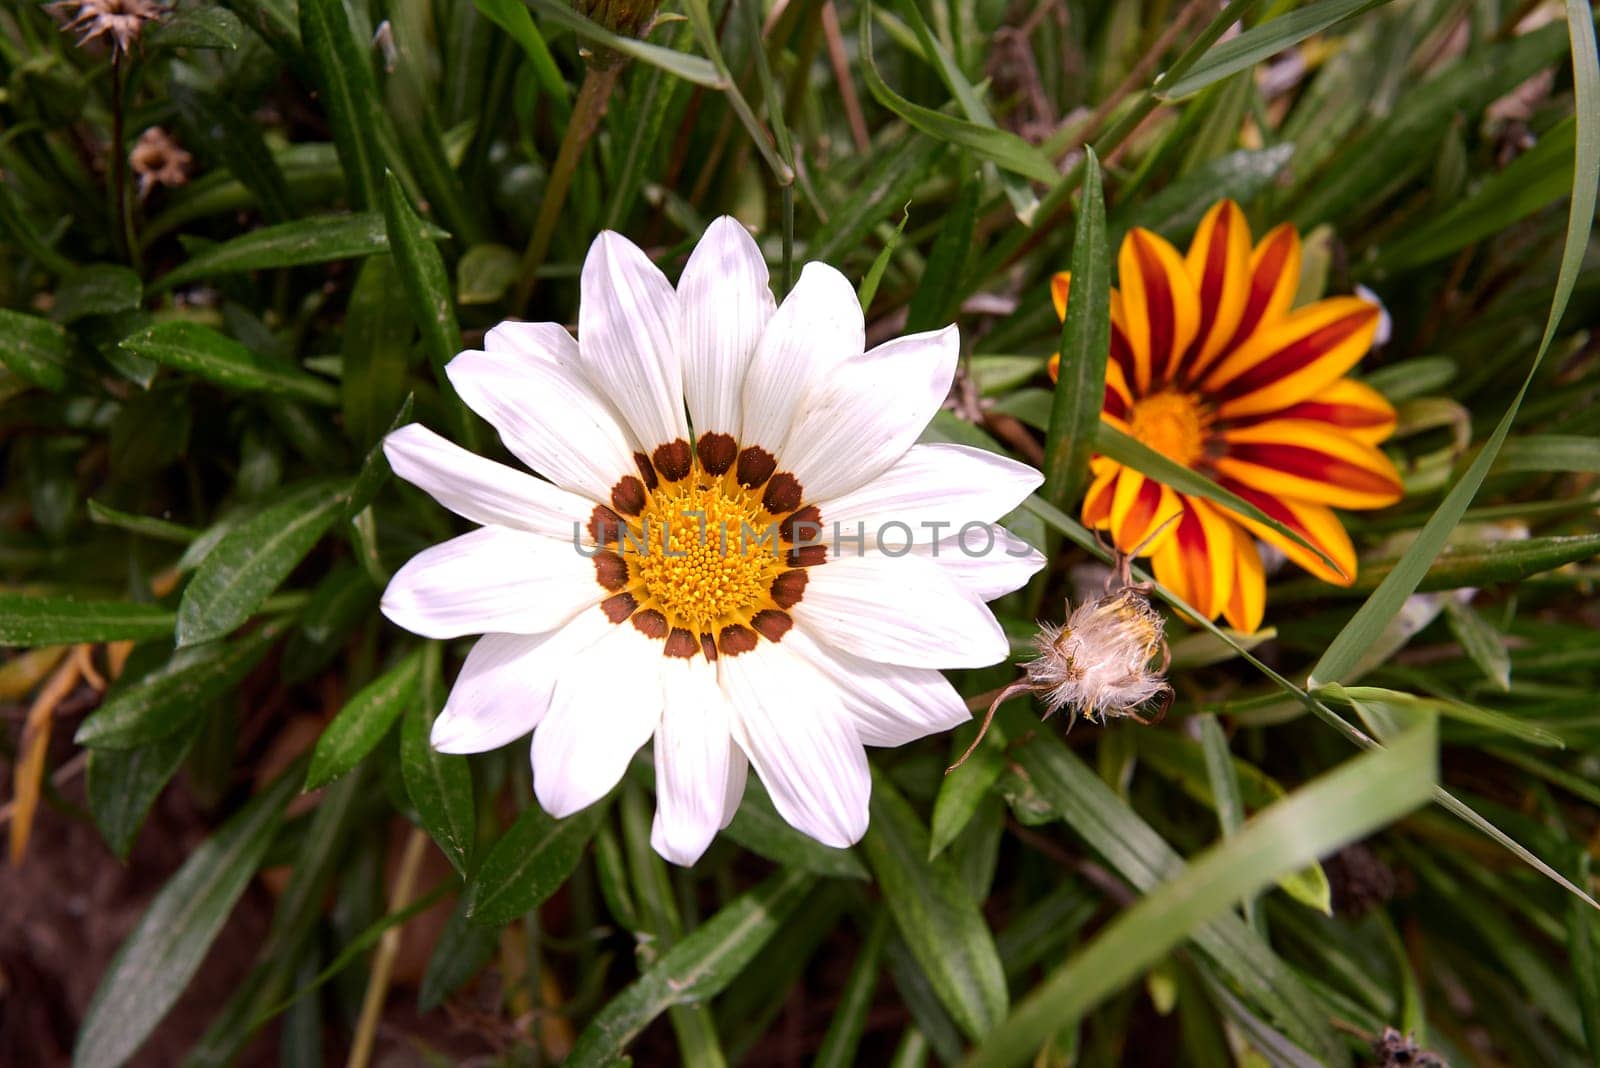 Group of two Indian flowers, orange and white. White and yellow Indian flower, unfocussed base. Macro photography, detail of the parts of the flower. Ismelia carinata